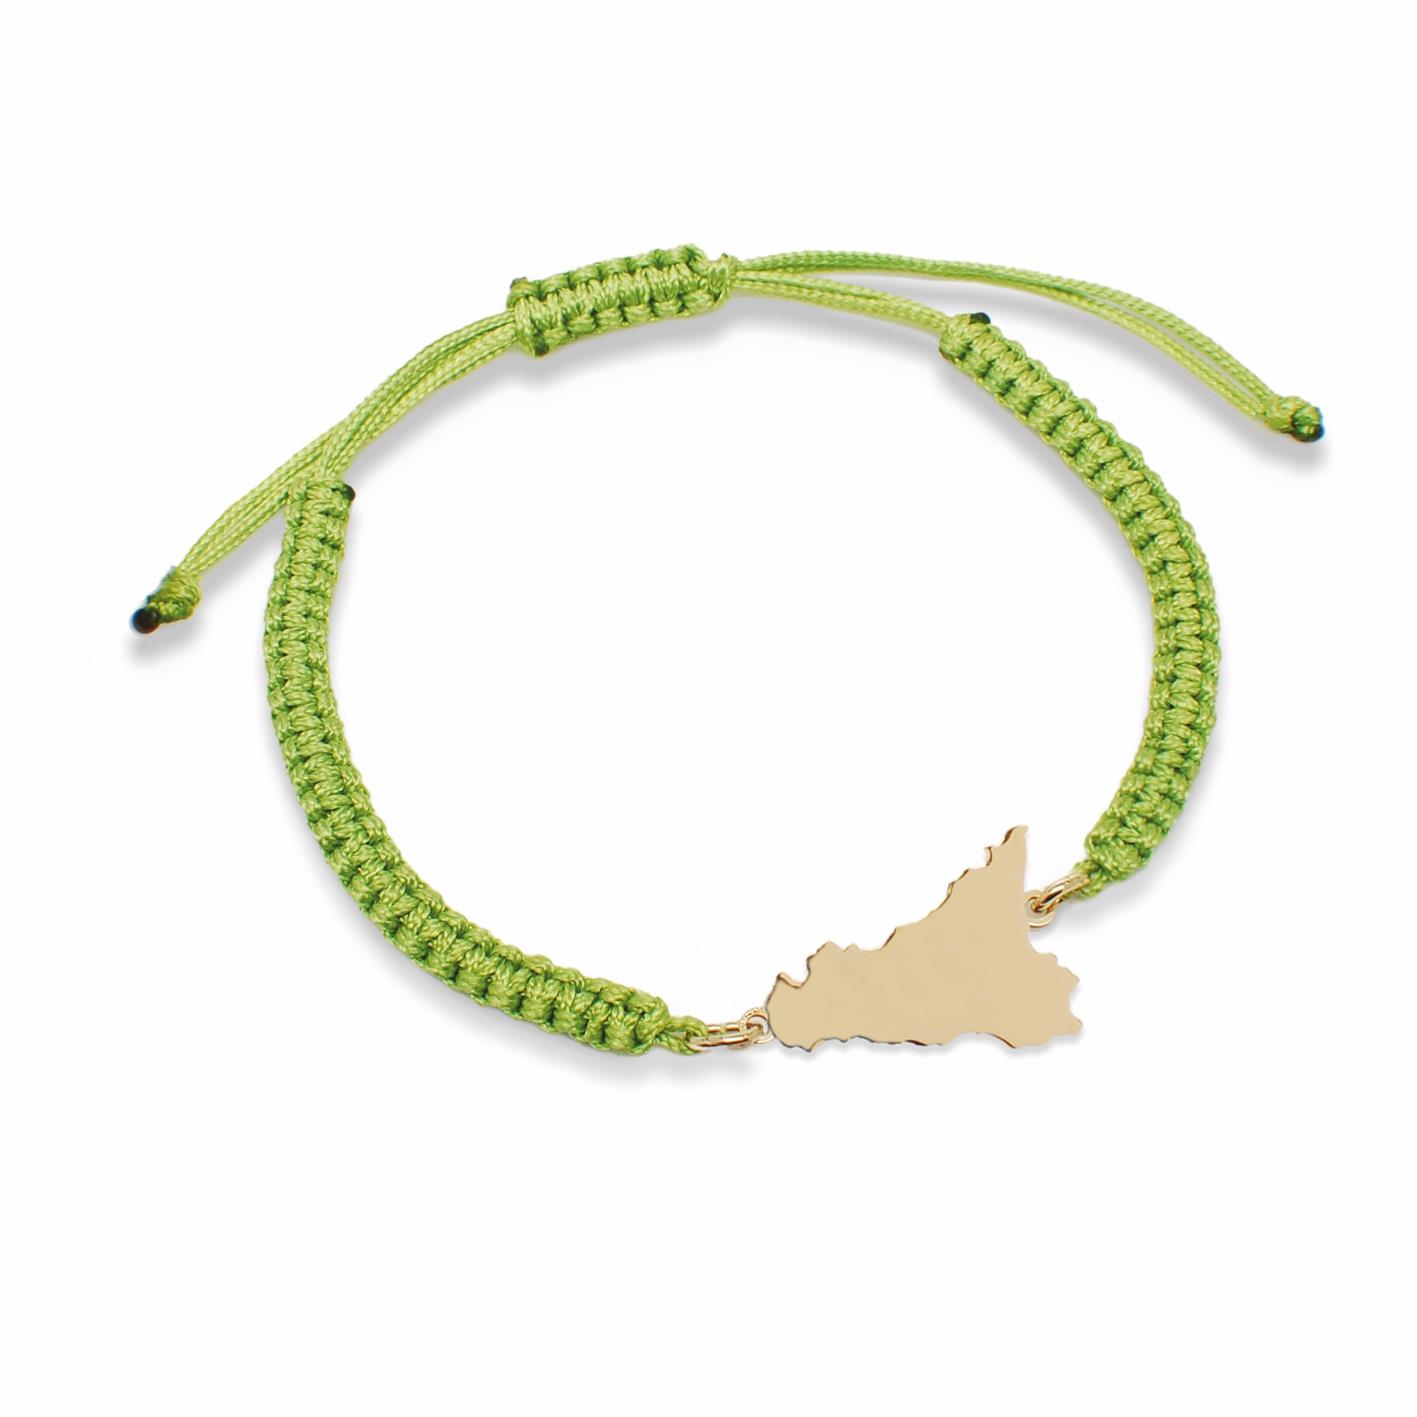 Green nylon bracelet with Sicily symbol in gold-plated silver - MY SICILY